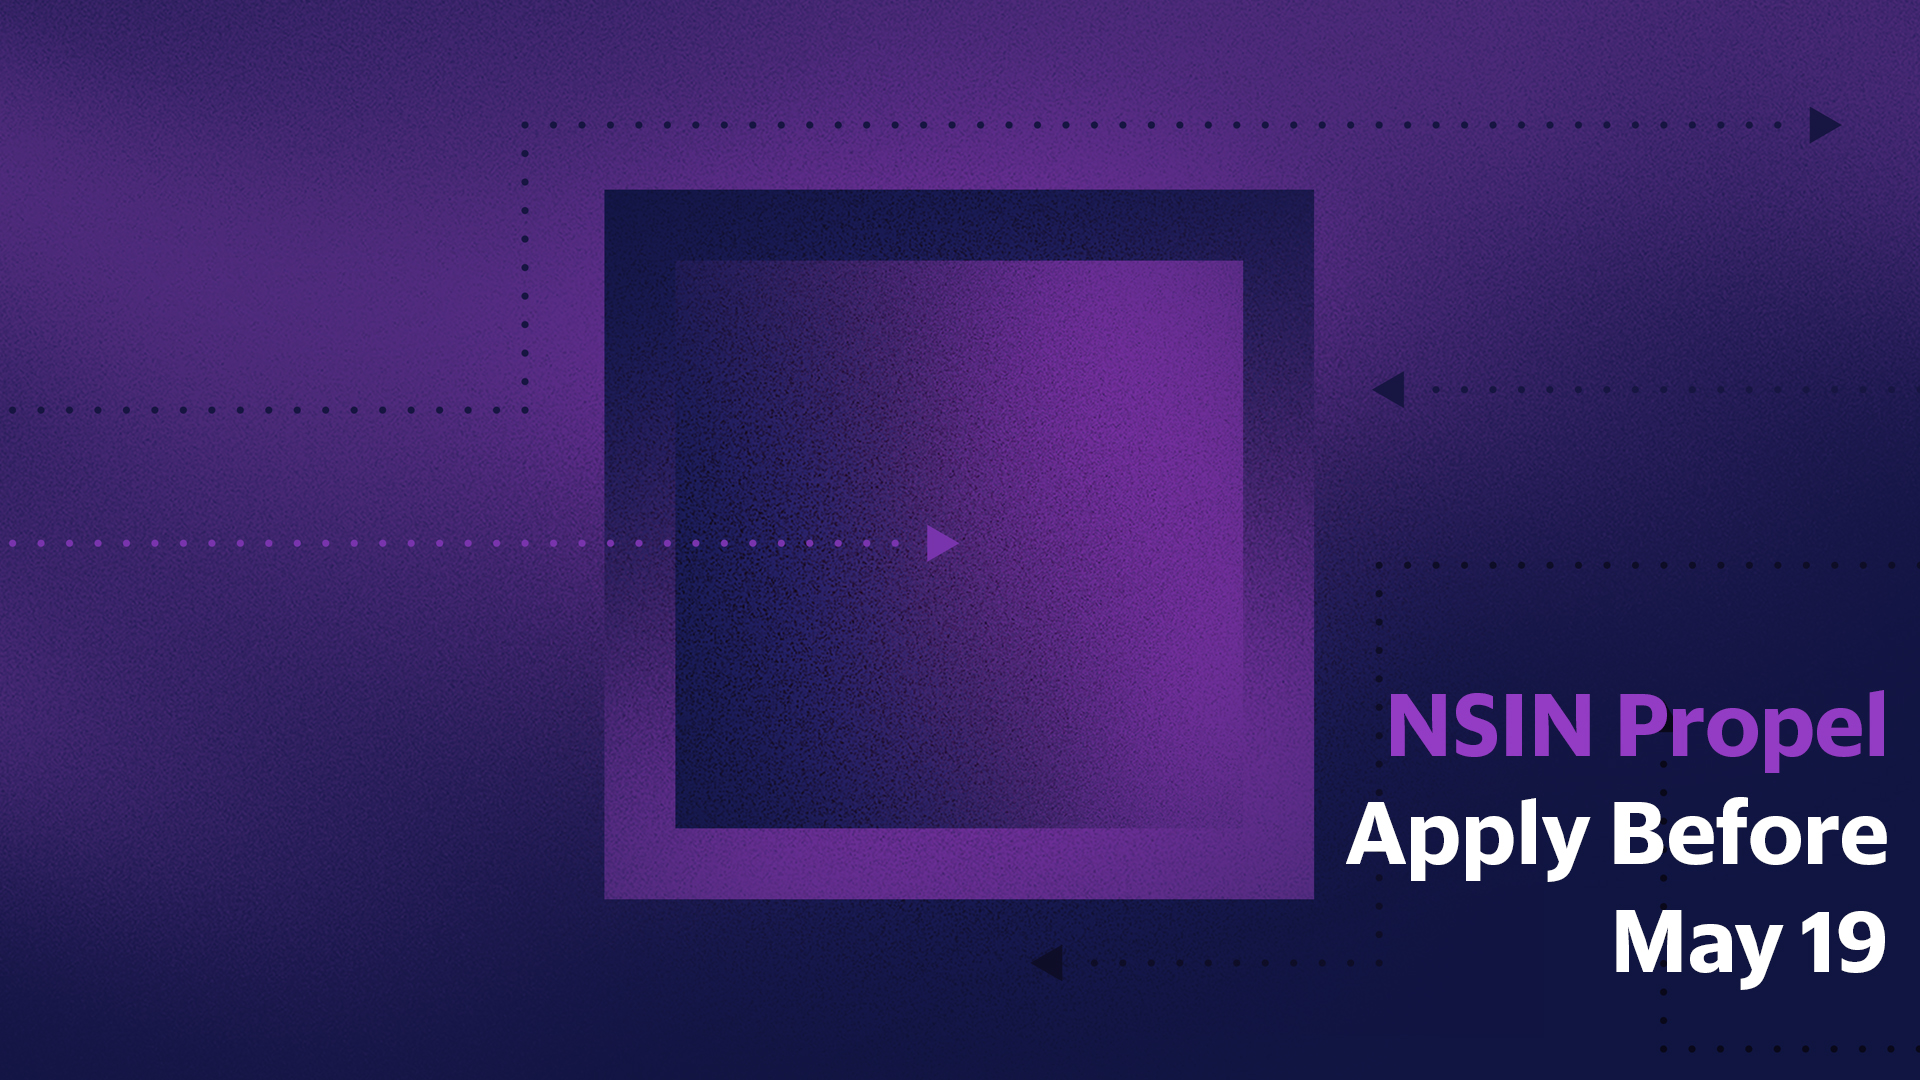 NSIN launches Propel Applications